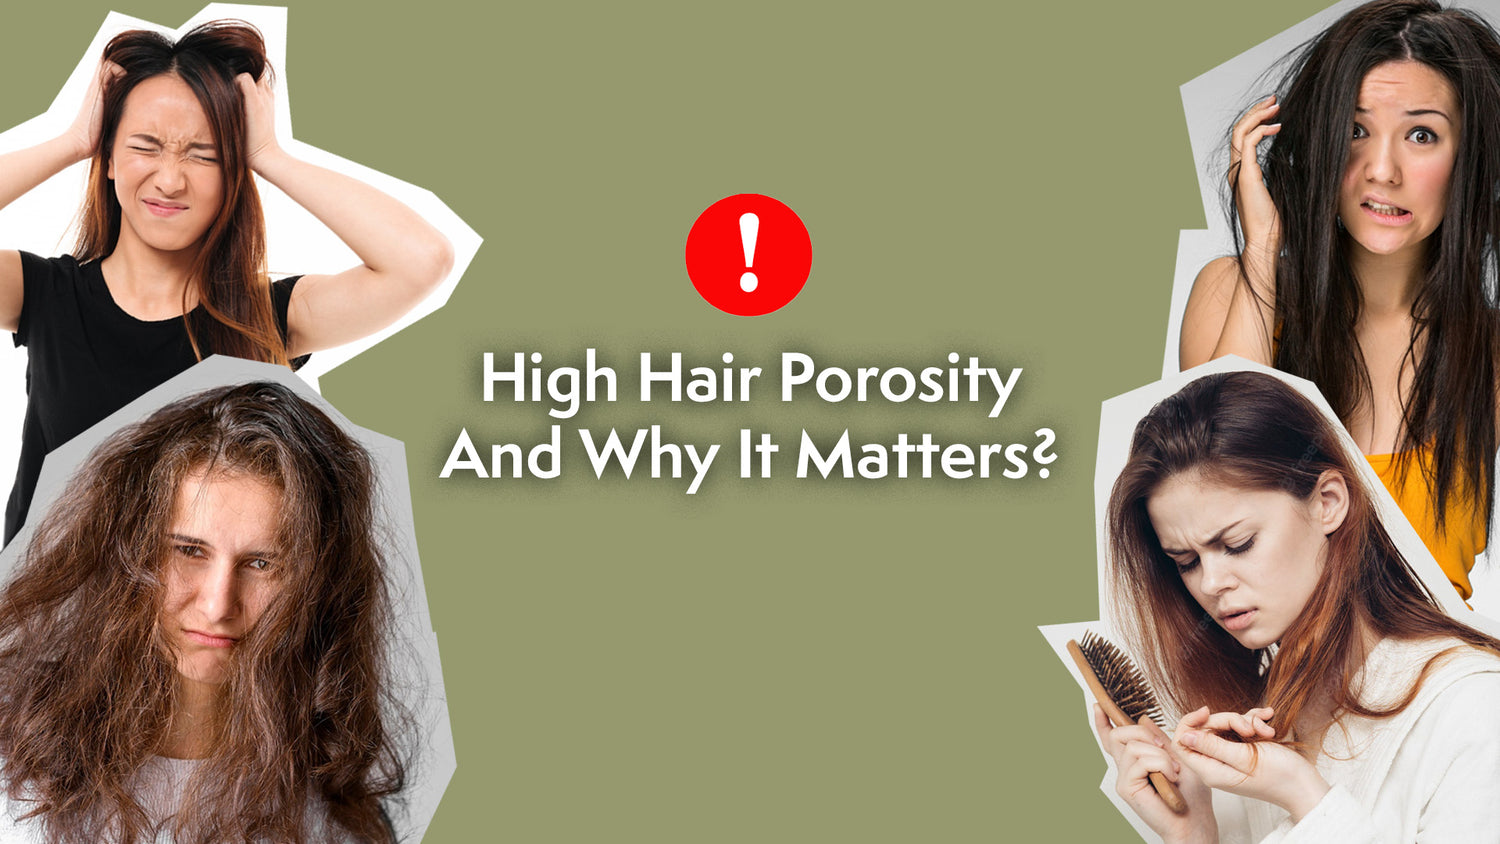 High Hair Porosity And Why It Matters?